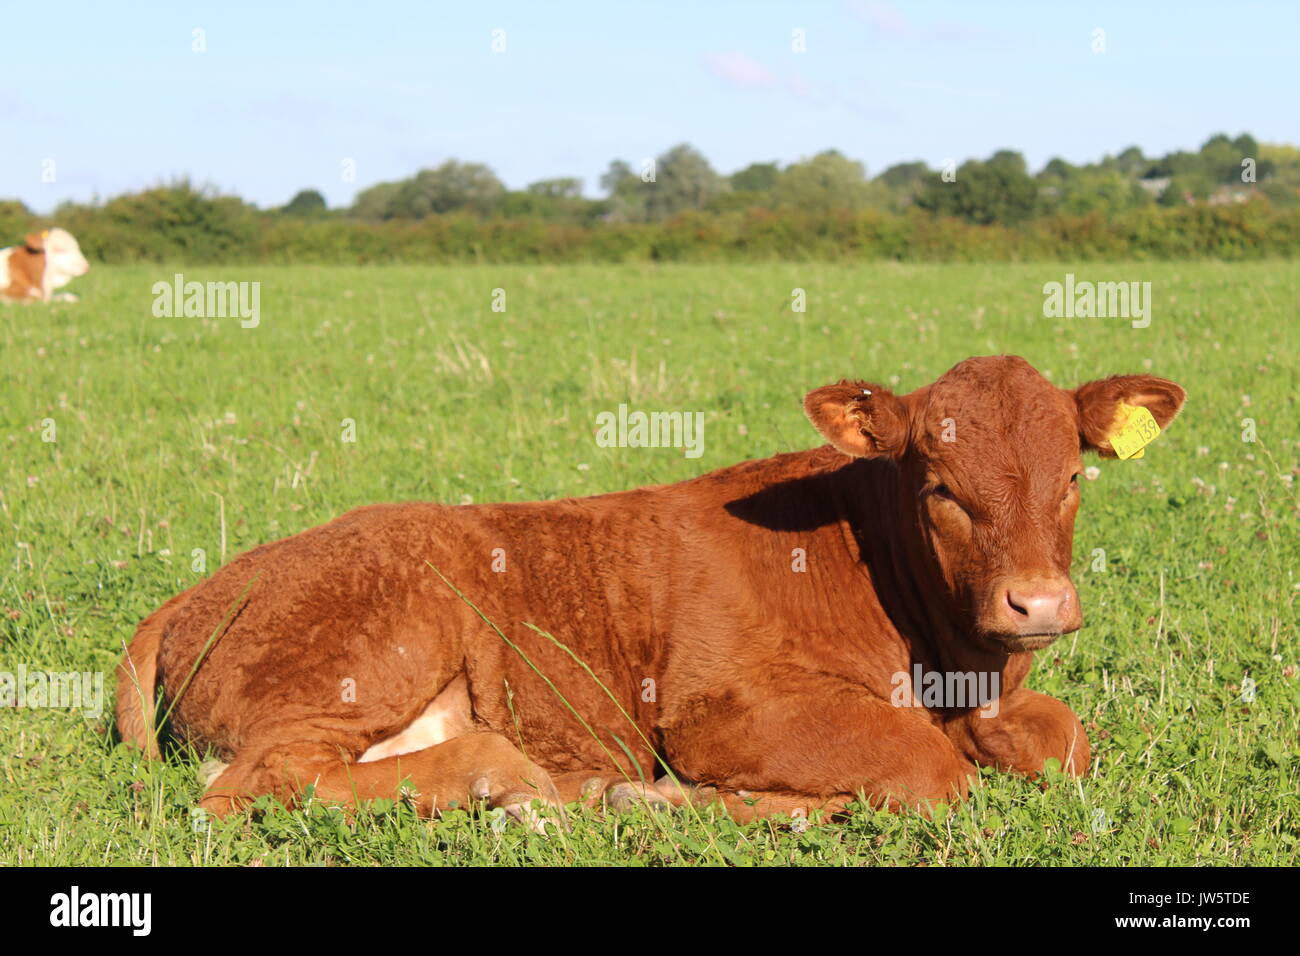 Veau limousine rouge laying in grass field Banque D'Images